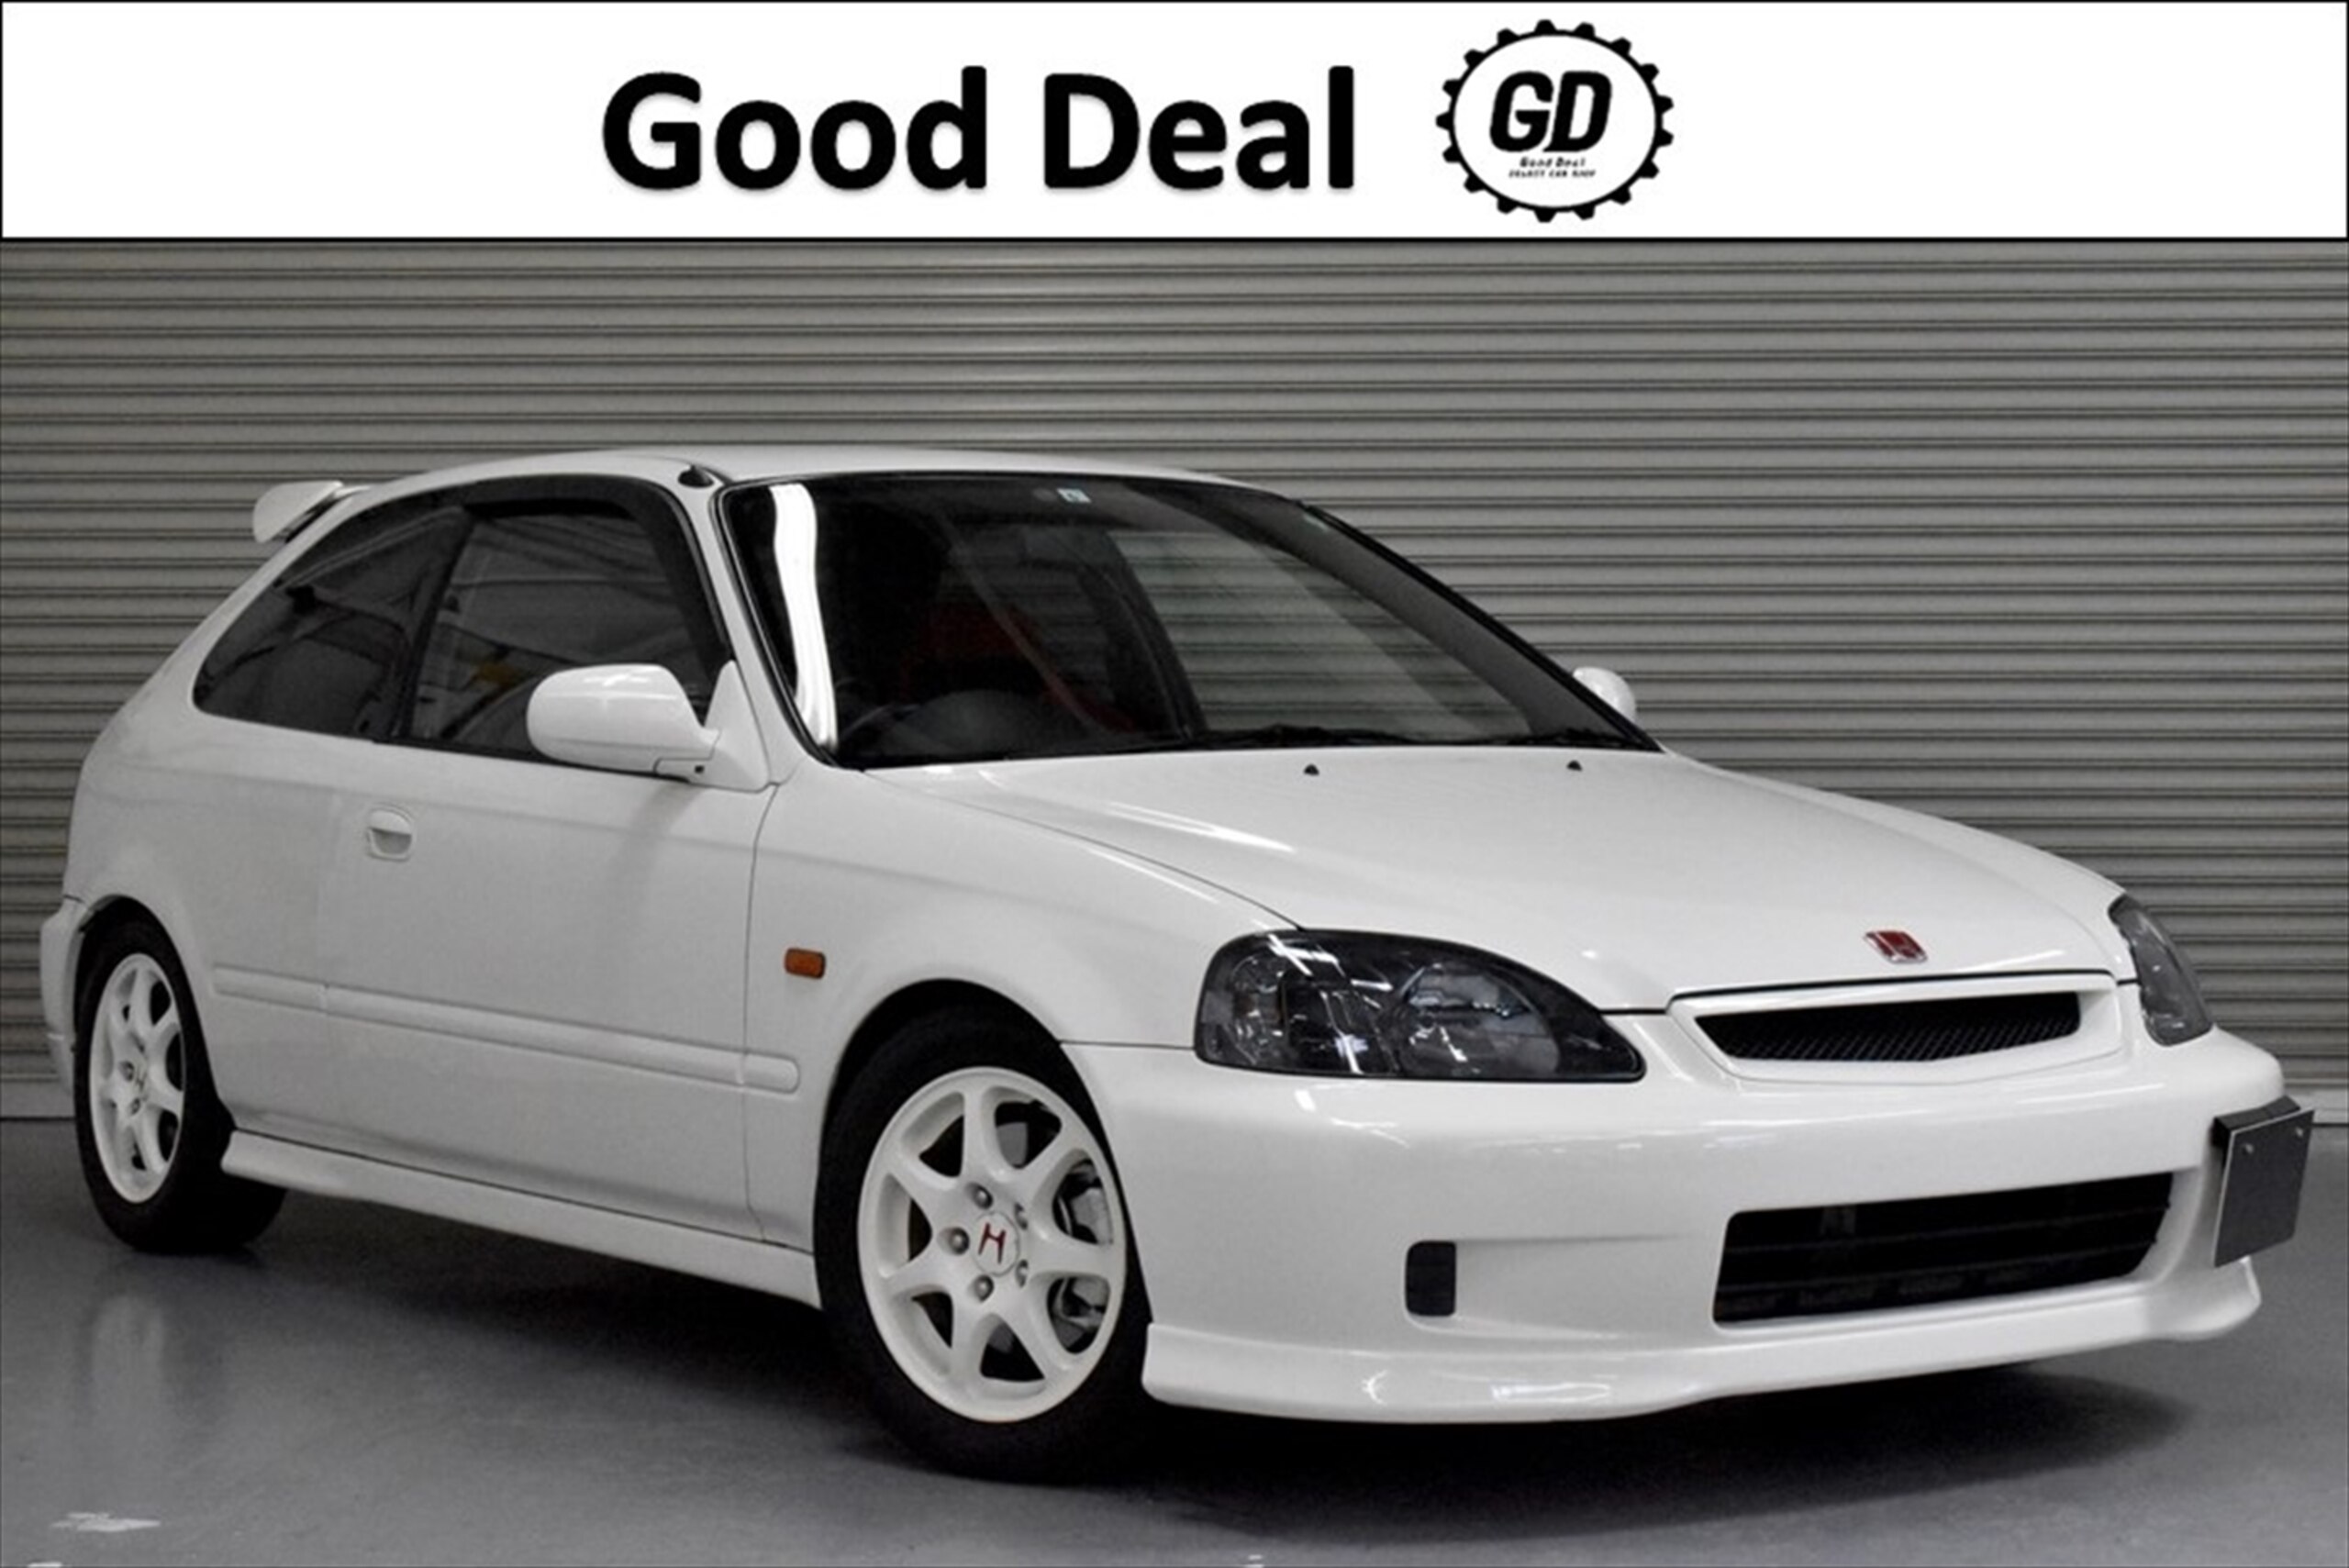 atomair Blaze dood gaan Used HONDA CIVIC TYPE R 1999 CFJ7544888 in good condition for sale